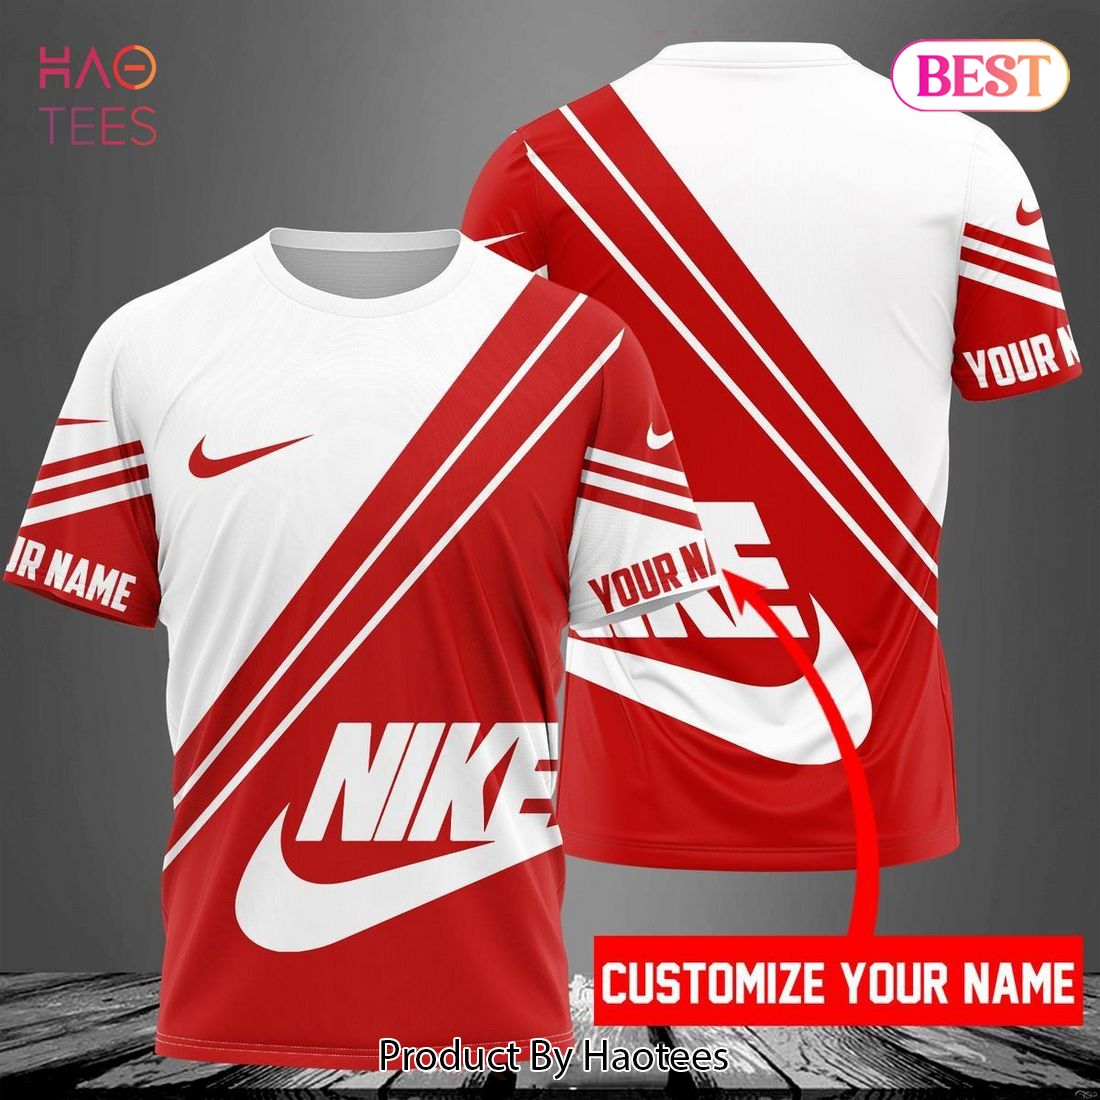 HOT Nike Red White Luxury Brand 3D T-Shirt Limited Editon